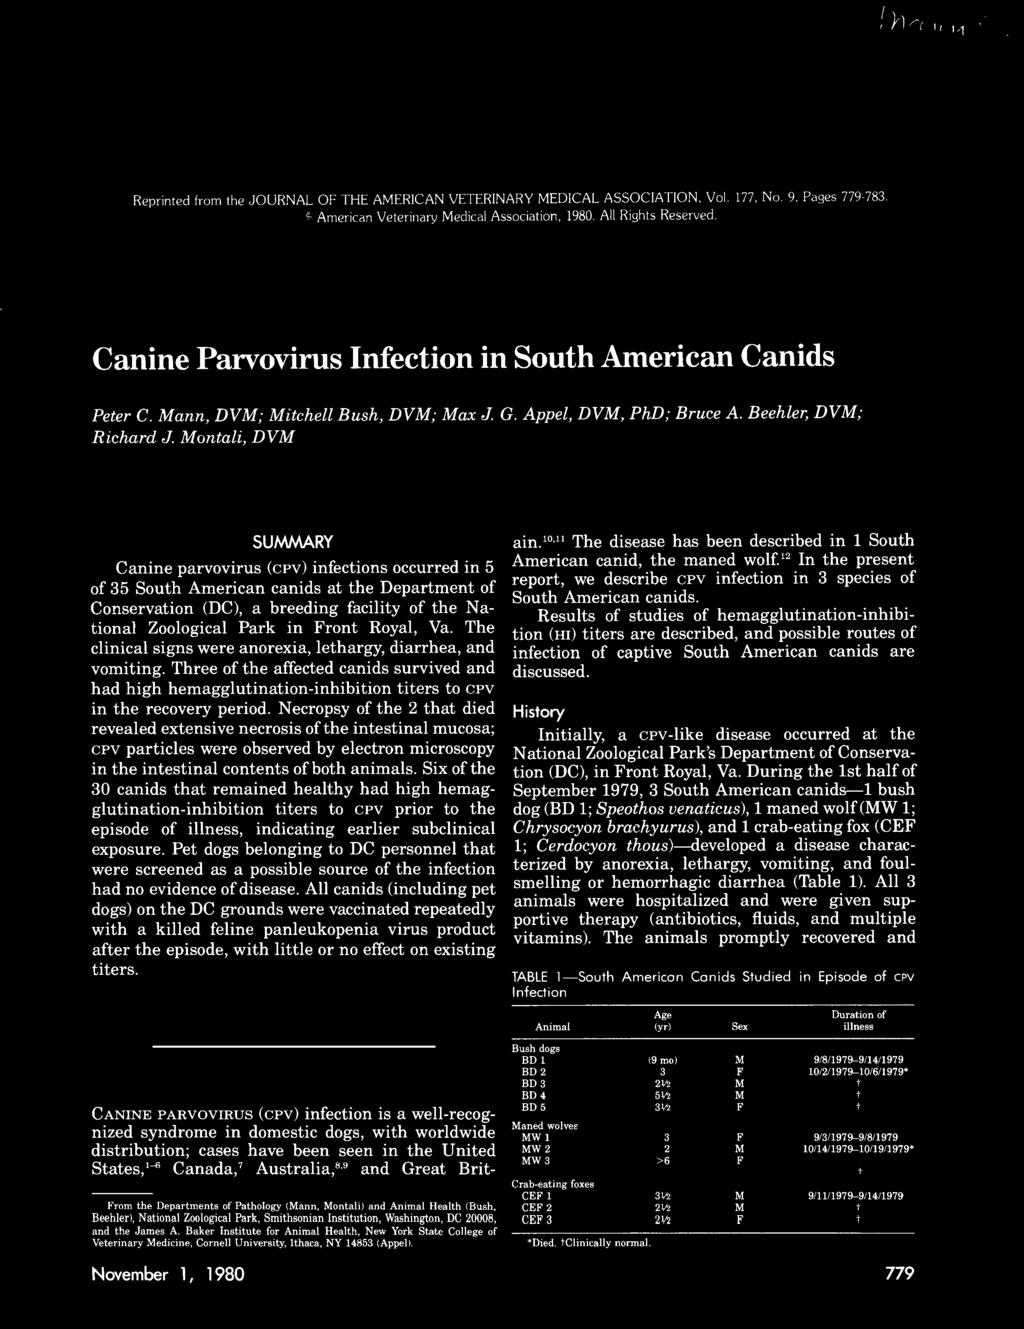 onali, DV SUAAARY Canine parvovirus (CPV) infecions occurred in 5 of 5 Souh American canids a he Deparmen of Conservaion (DC), a breeding faciliy of he Naional Zoological Park in ron Royal, Va.